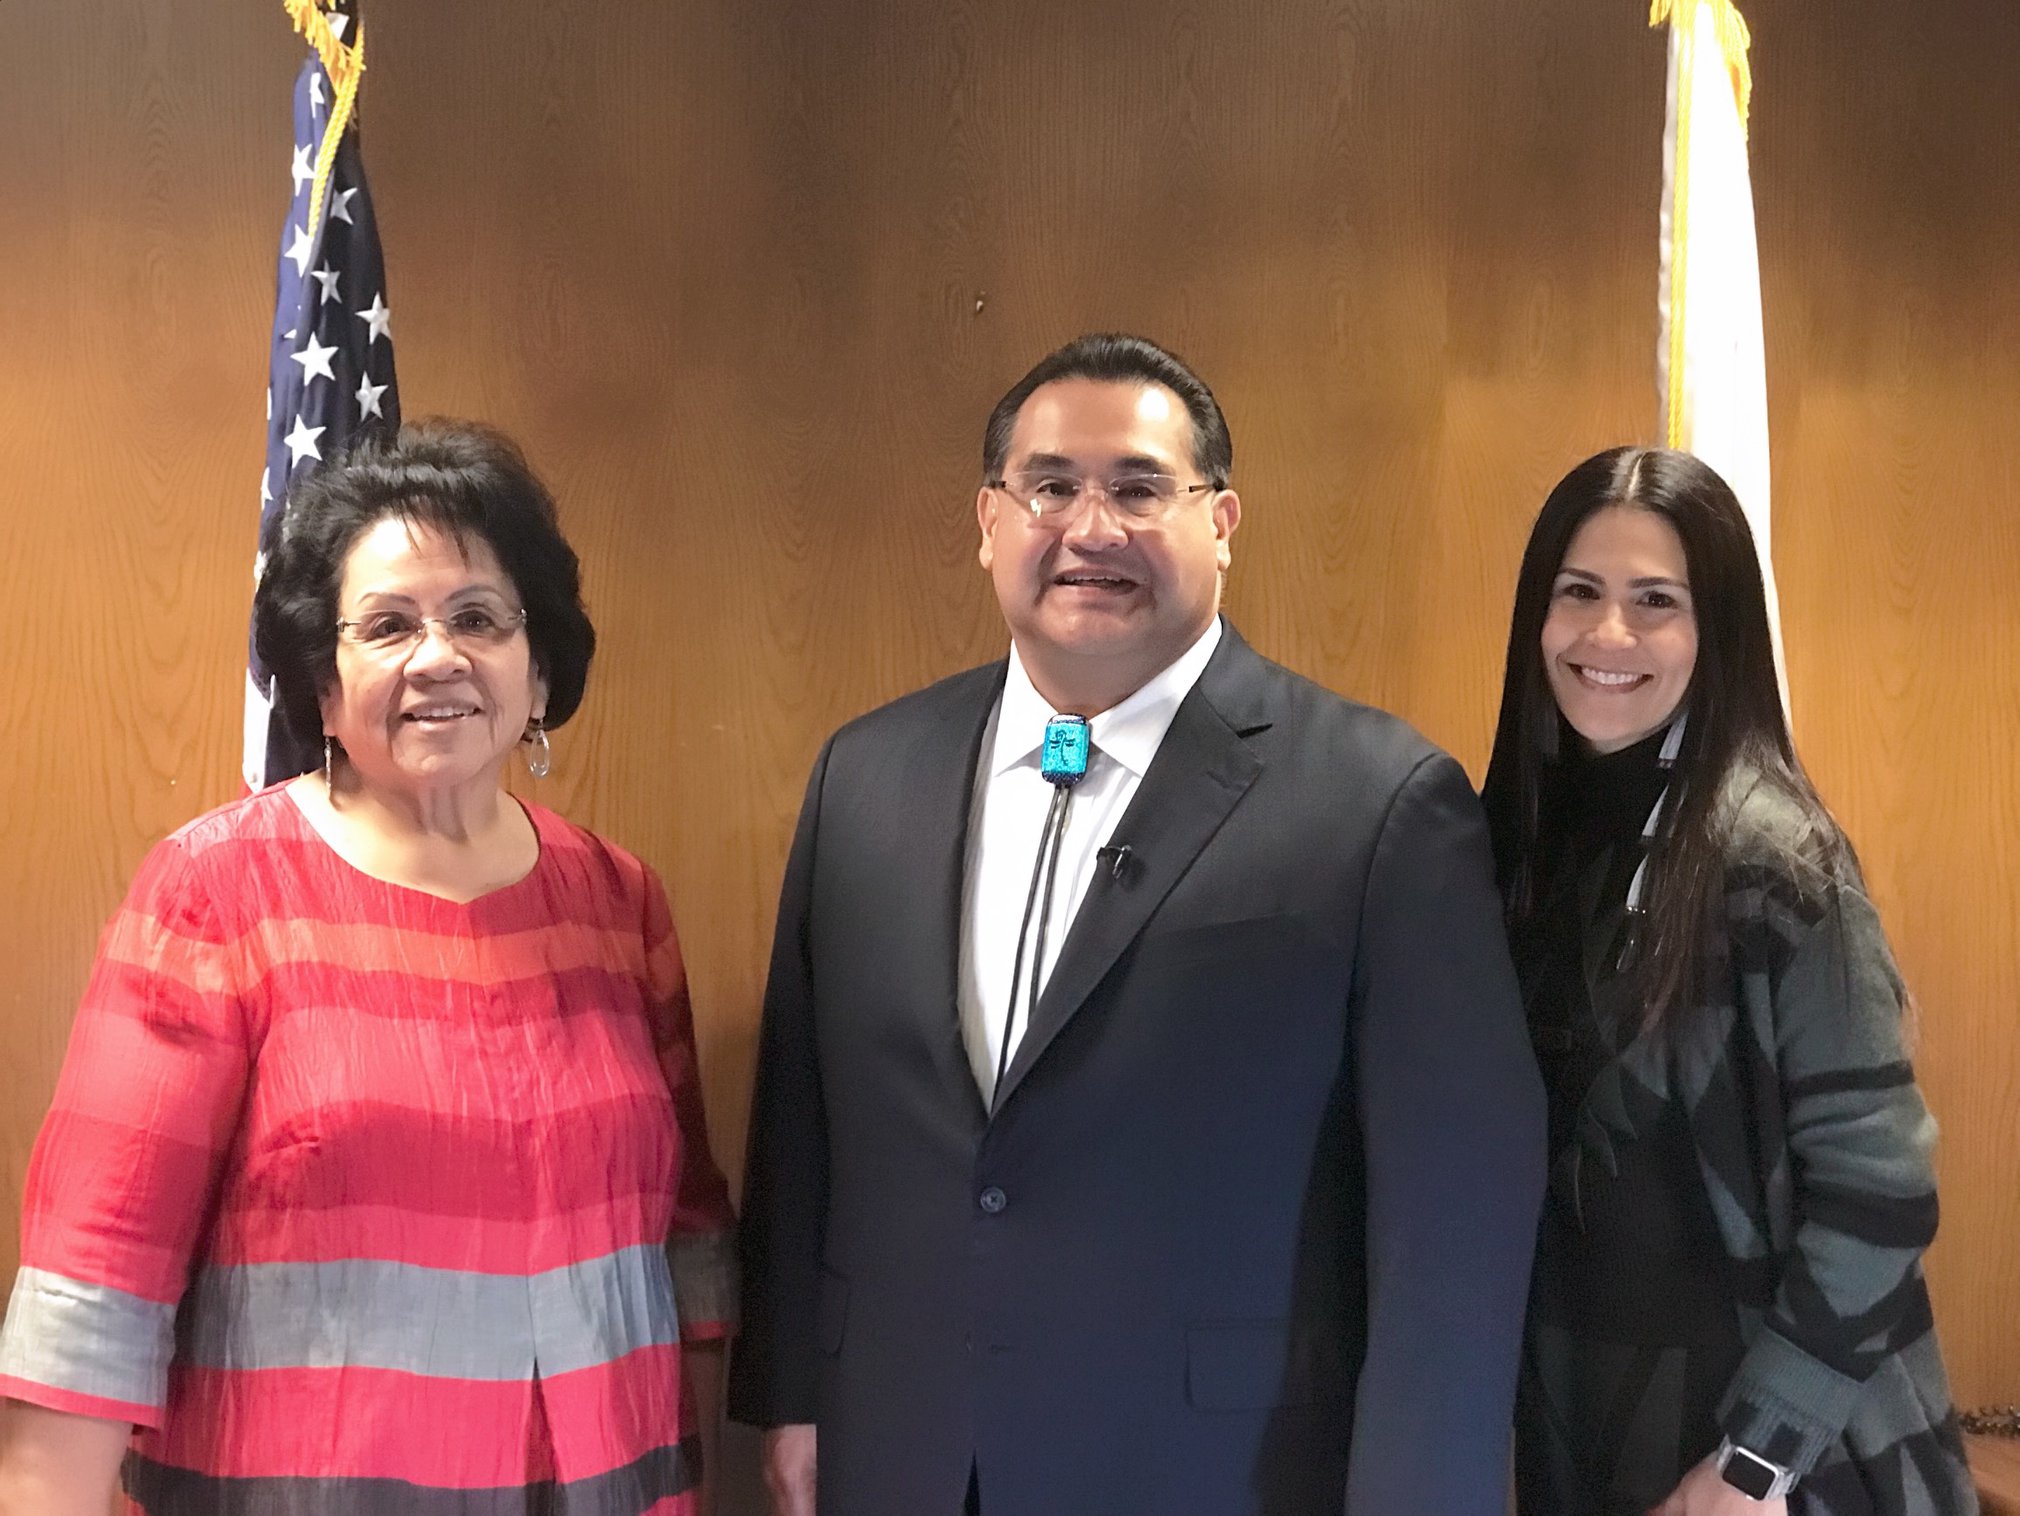 Mary Ann Martin Andreas, Morongo Tribal Council; James Ramos, 40th Assemblyman (San Manuel Band of Mission Indians); and Dr. Joely Proudfit, Luiseño, at Swearing-In Ceremony.